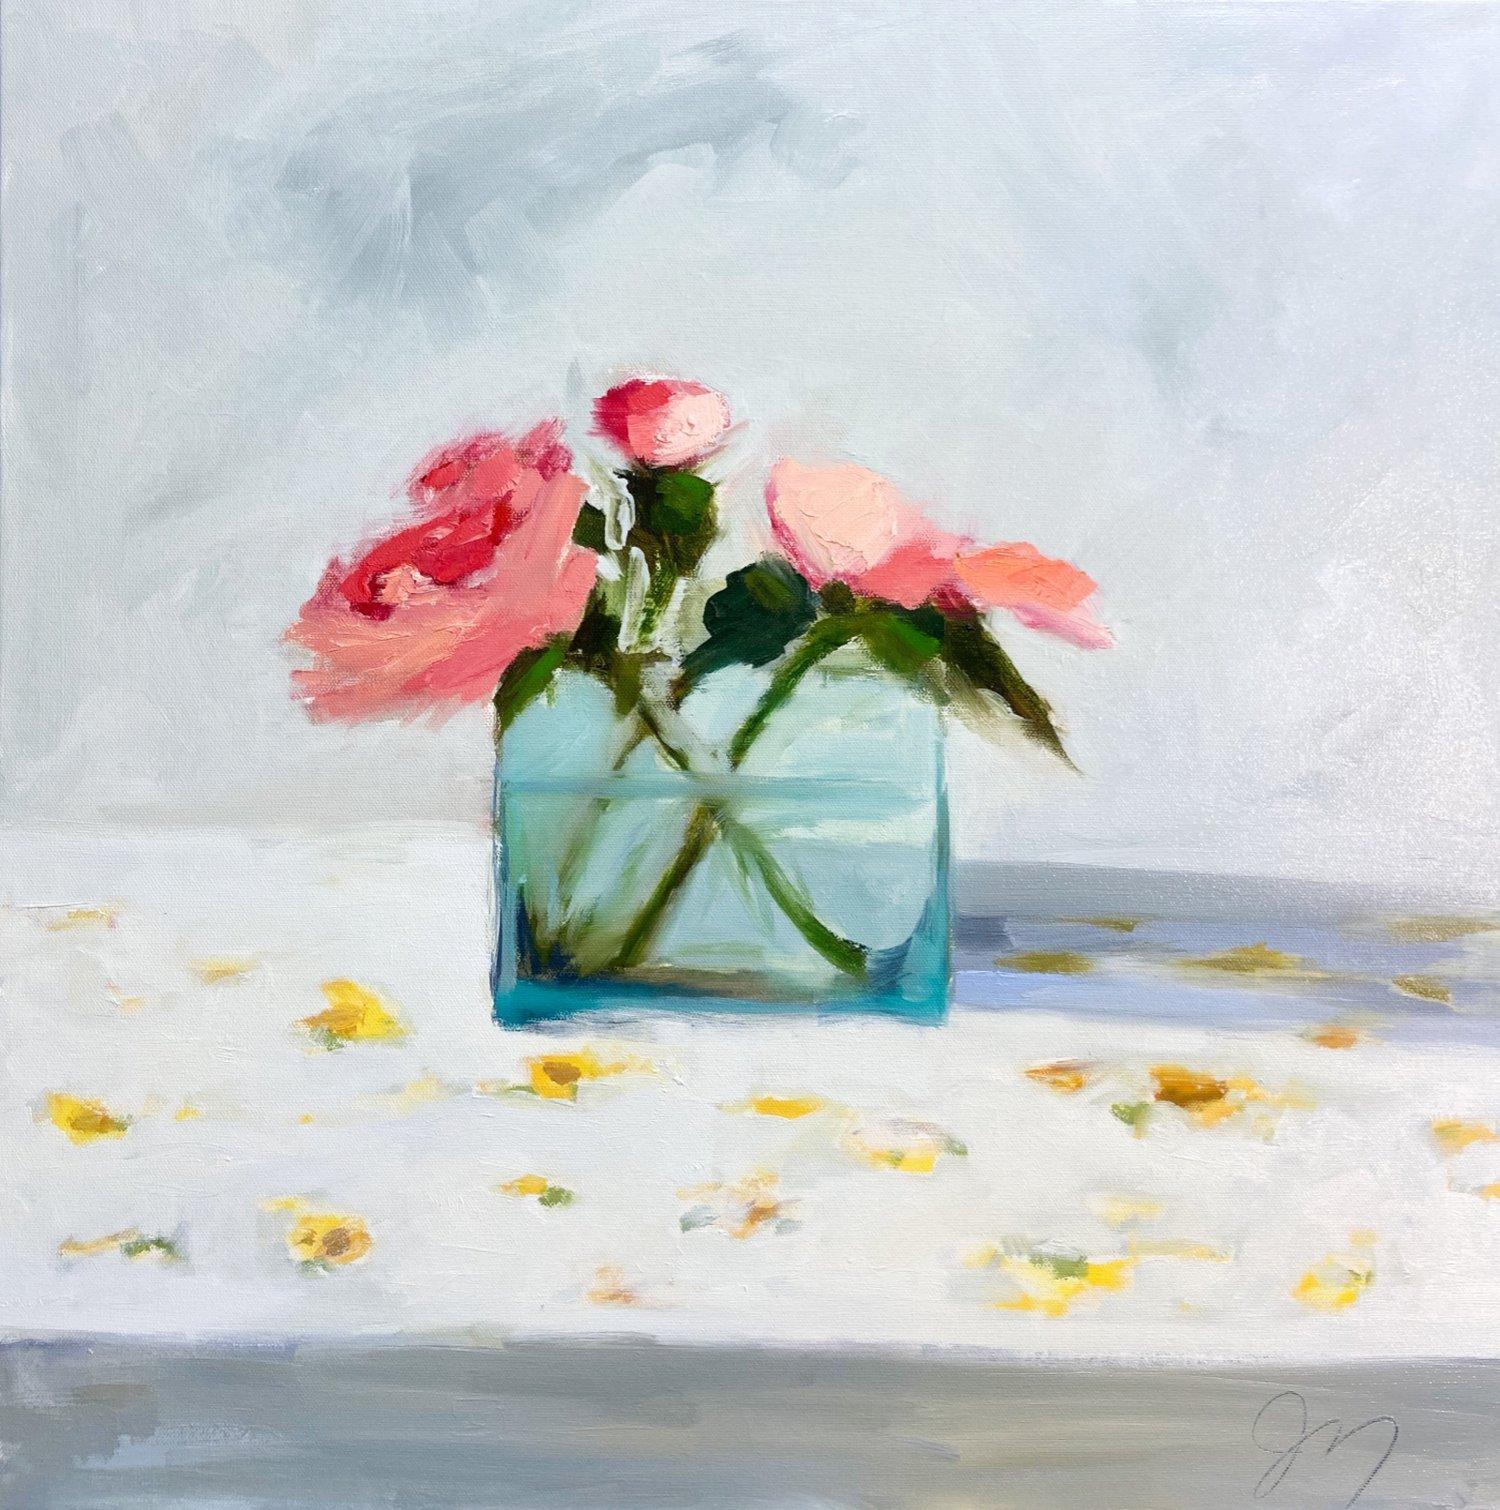 This fresh and airy bouquet piece, "Pink Peonies" is a 24x24 oil painting on canvas by artist Jill Matthews. Depicted is an impressionistic pink peony bouquet in a clear crystal blue vase. A yellow daisy-patterned tablecloth and white background